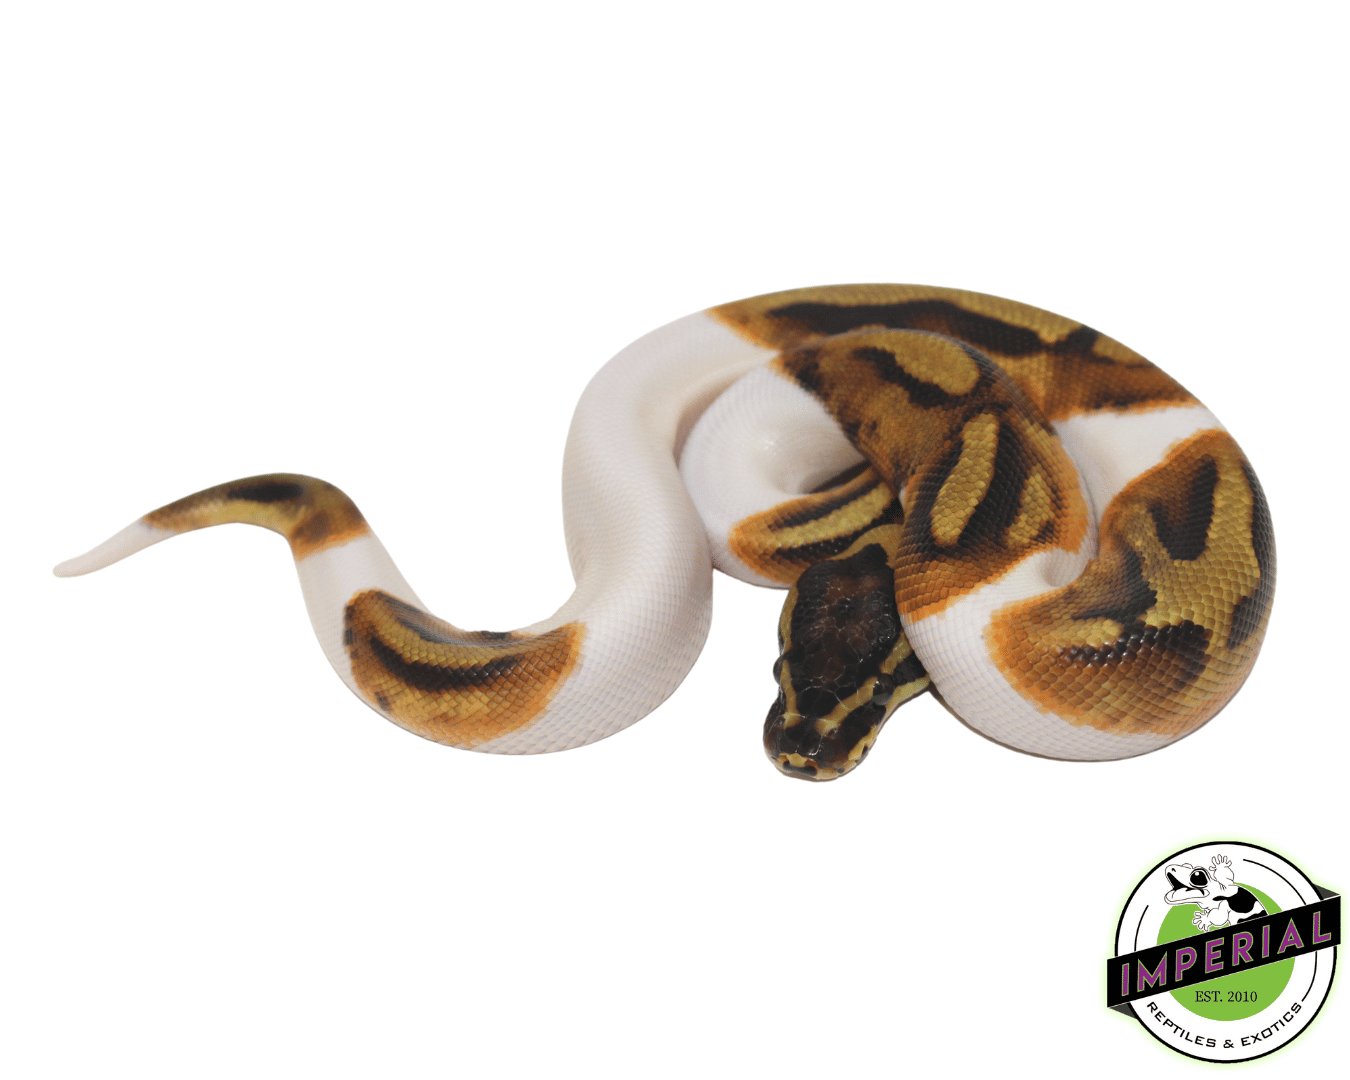 enchi pied ball python for sale online, buy cheap ball pythons near me